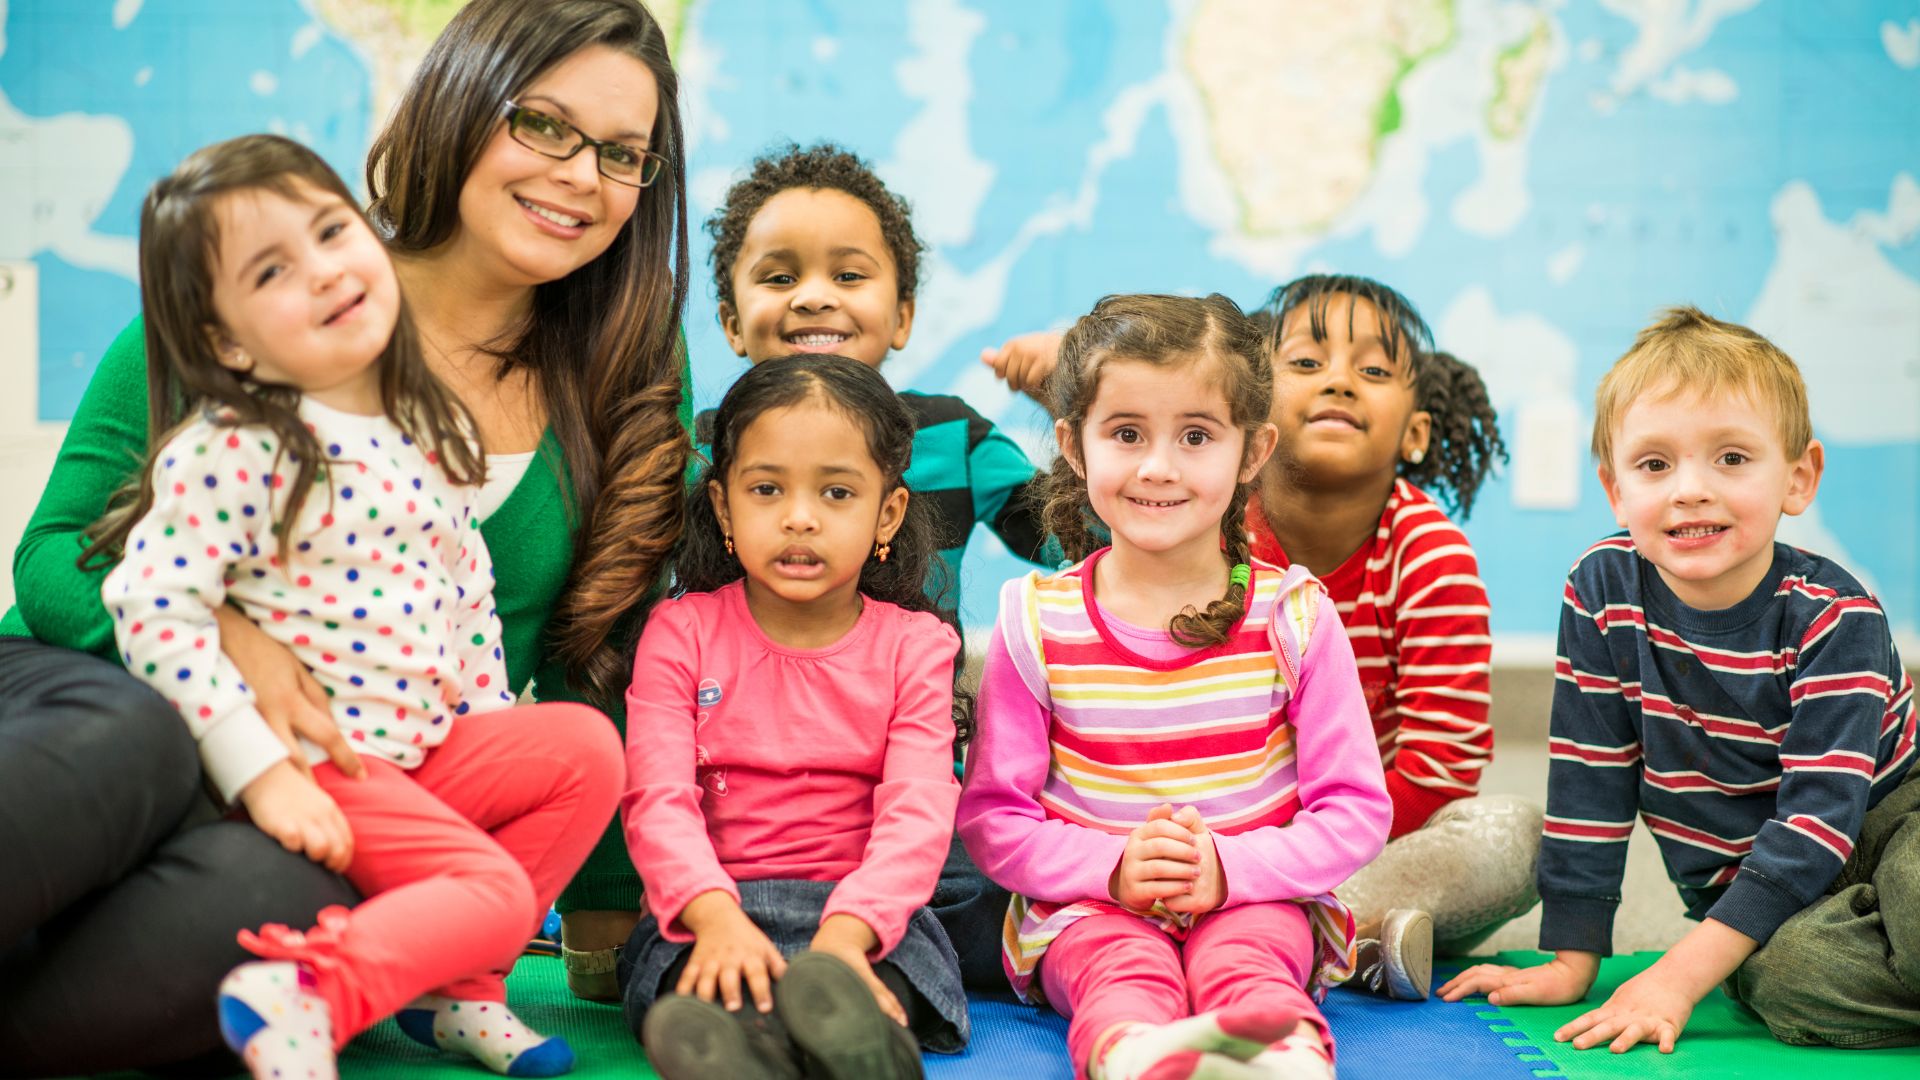 A female teacher with glasses sitting in her classroom surrounded by six children smiling at the camera with a map of the world as their background.